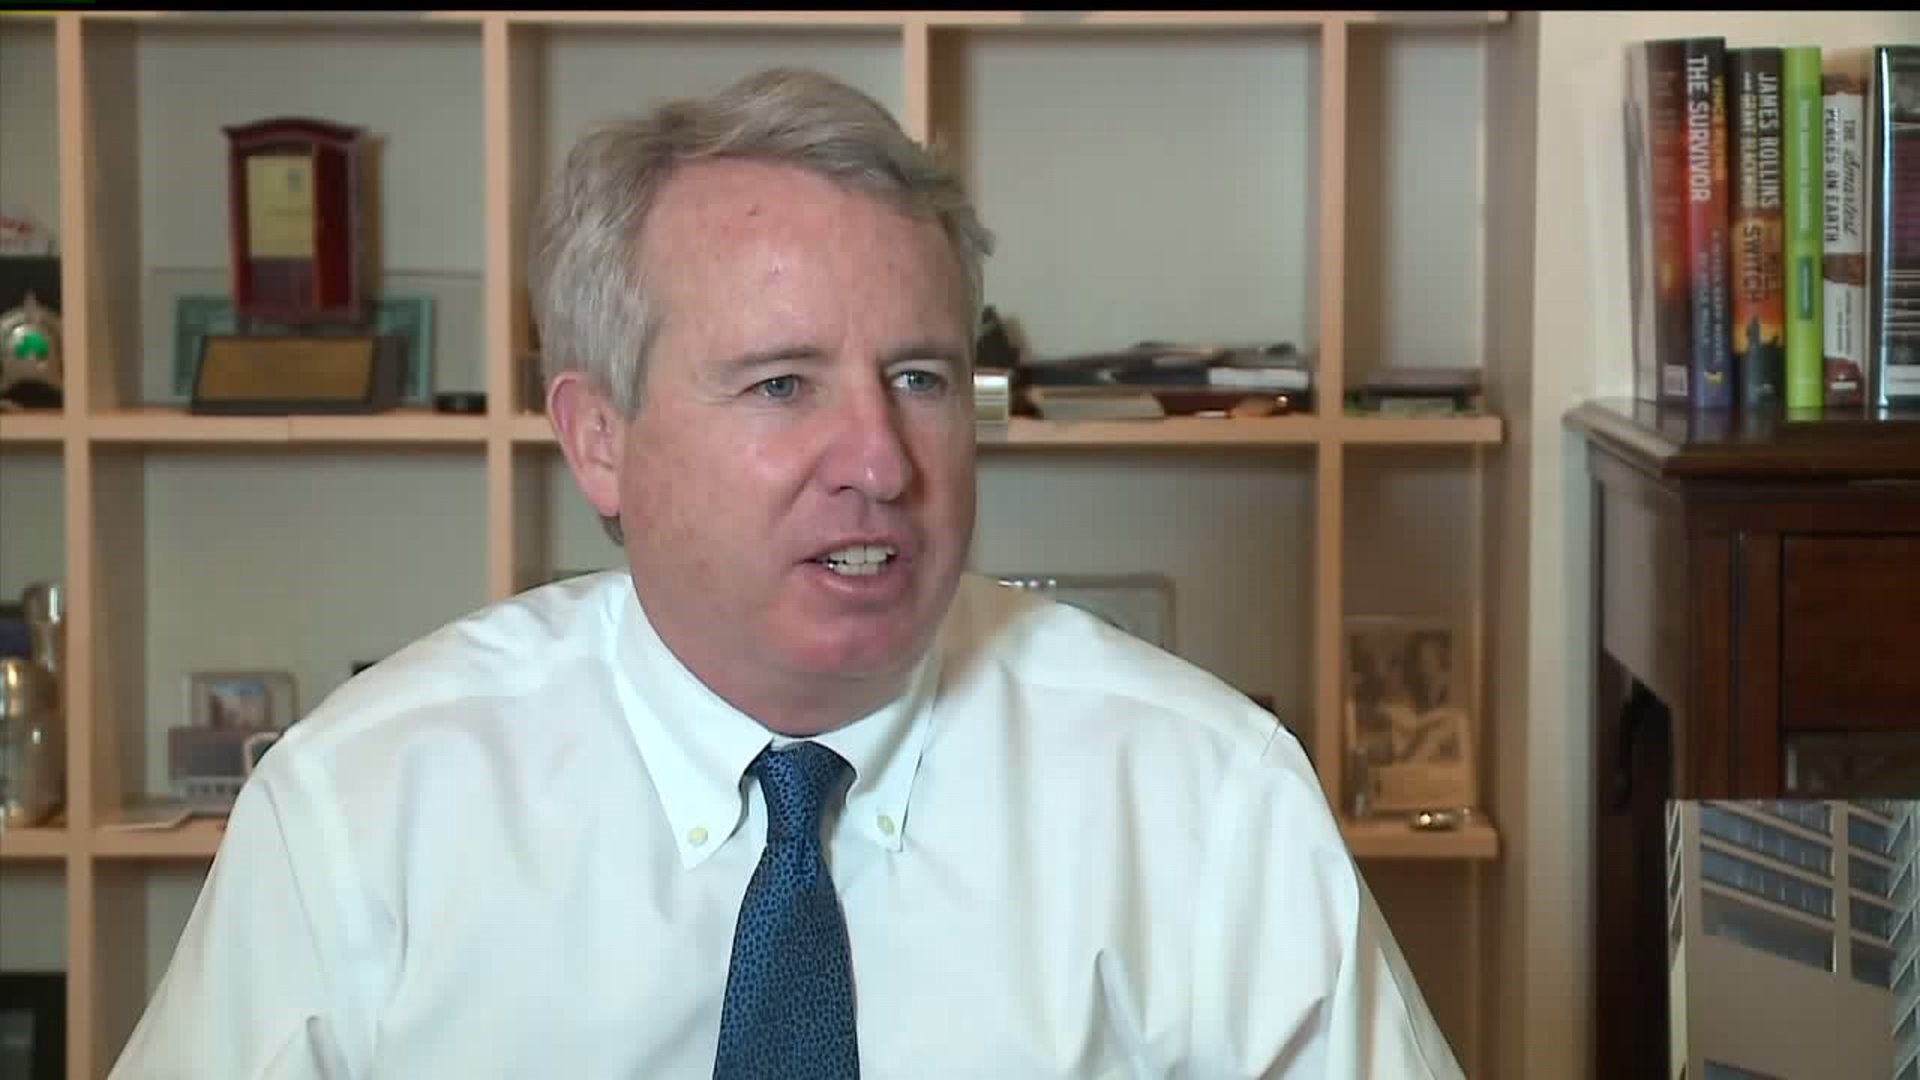 Chris Kennedy announces he will run for IL governor